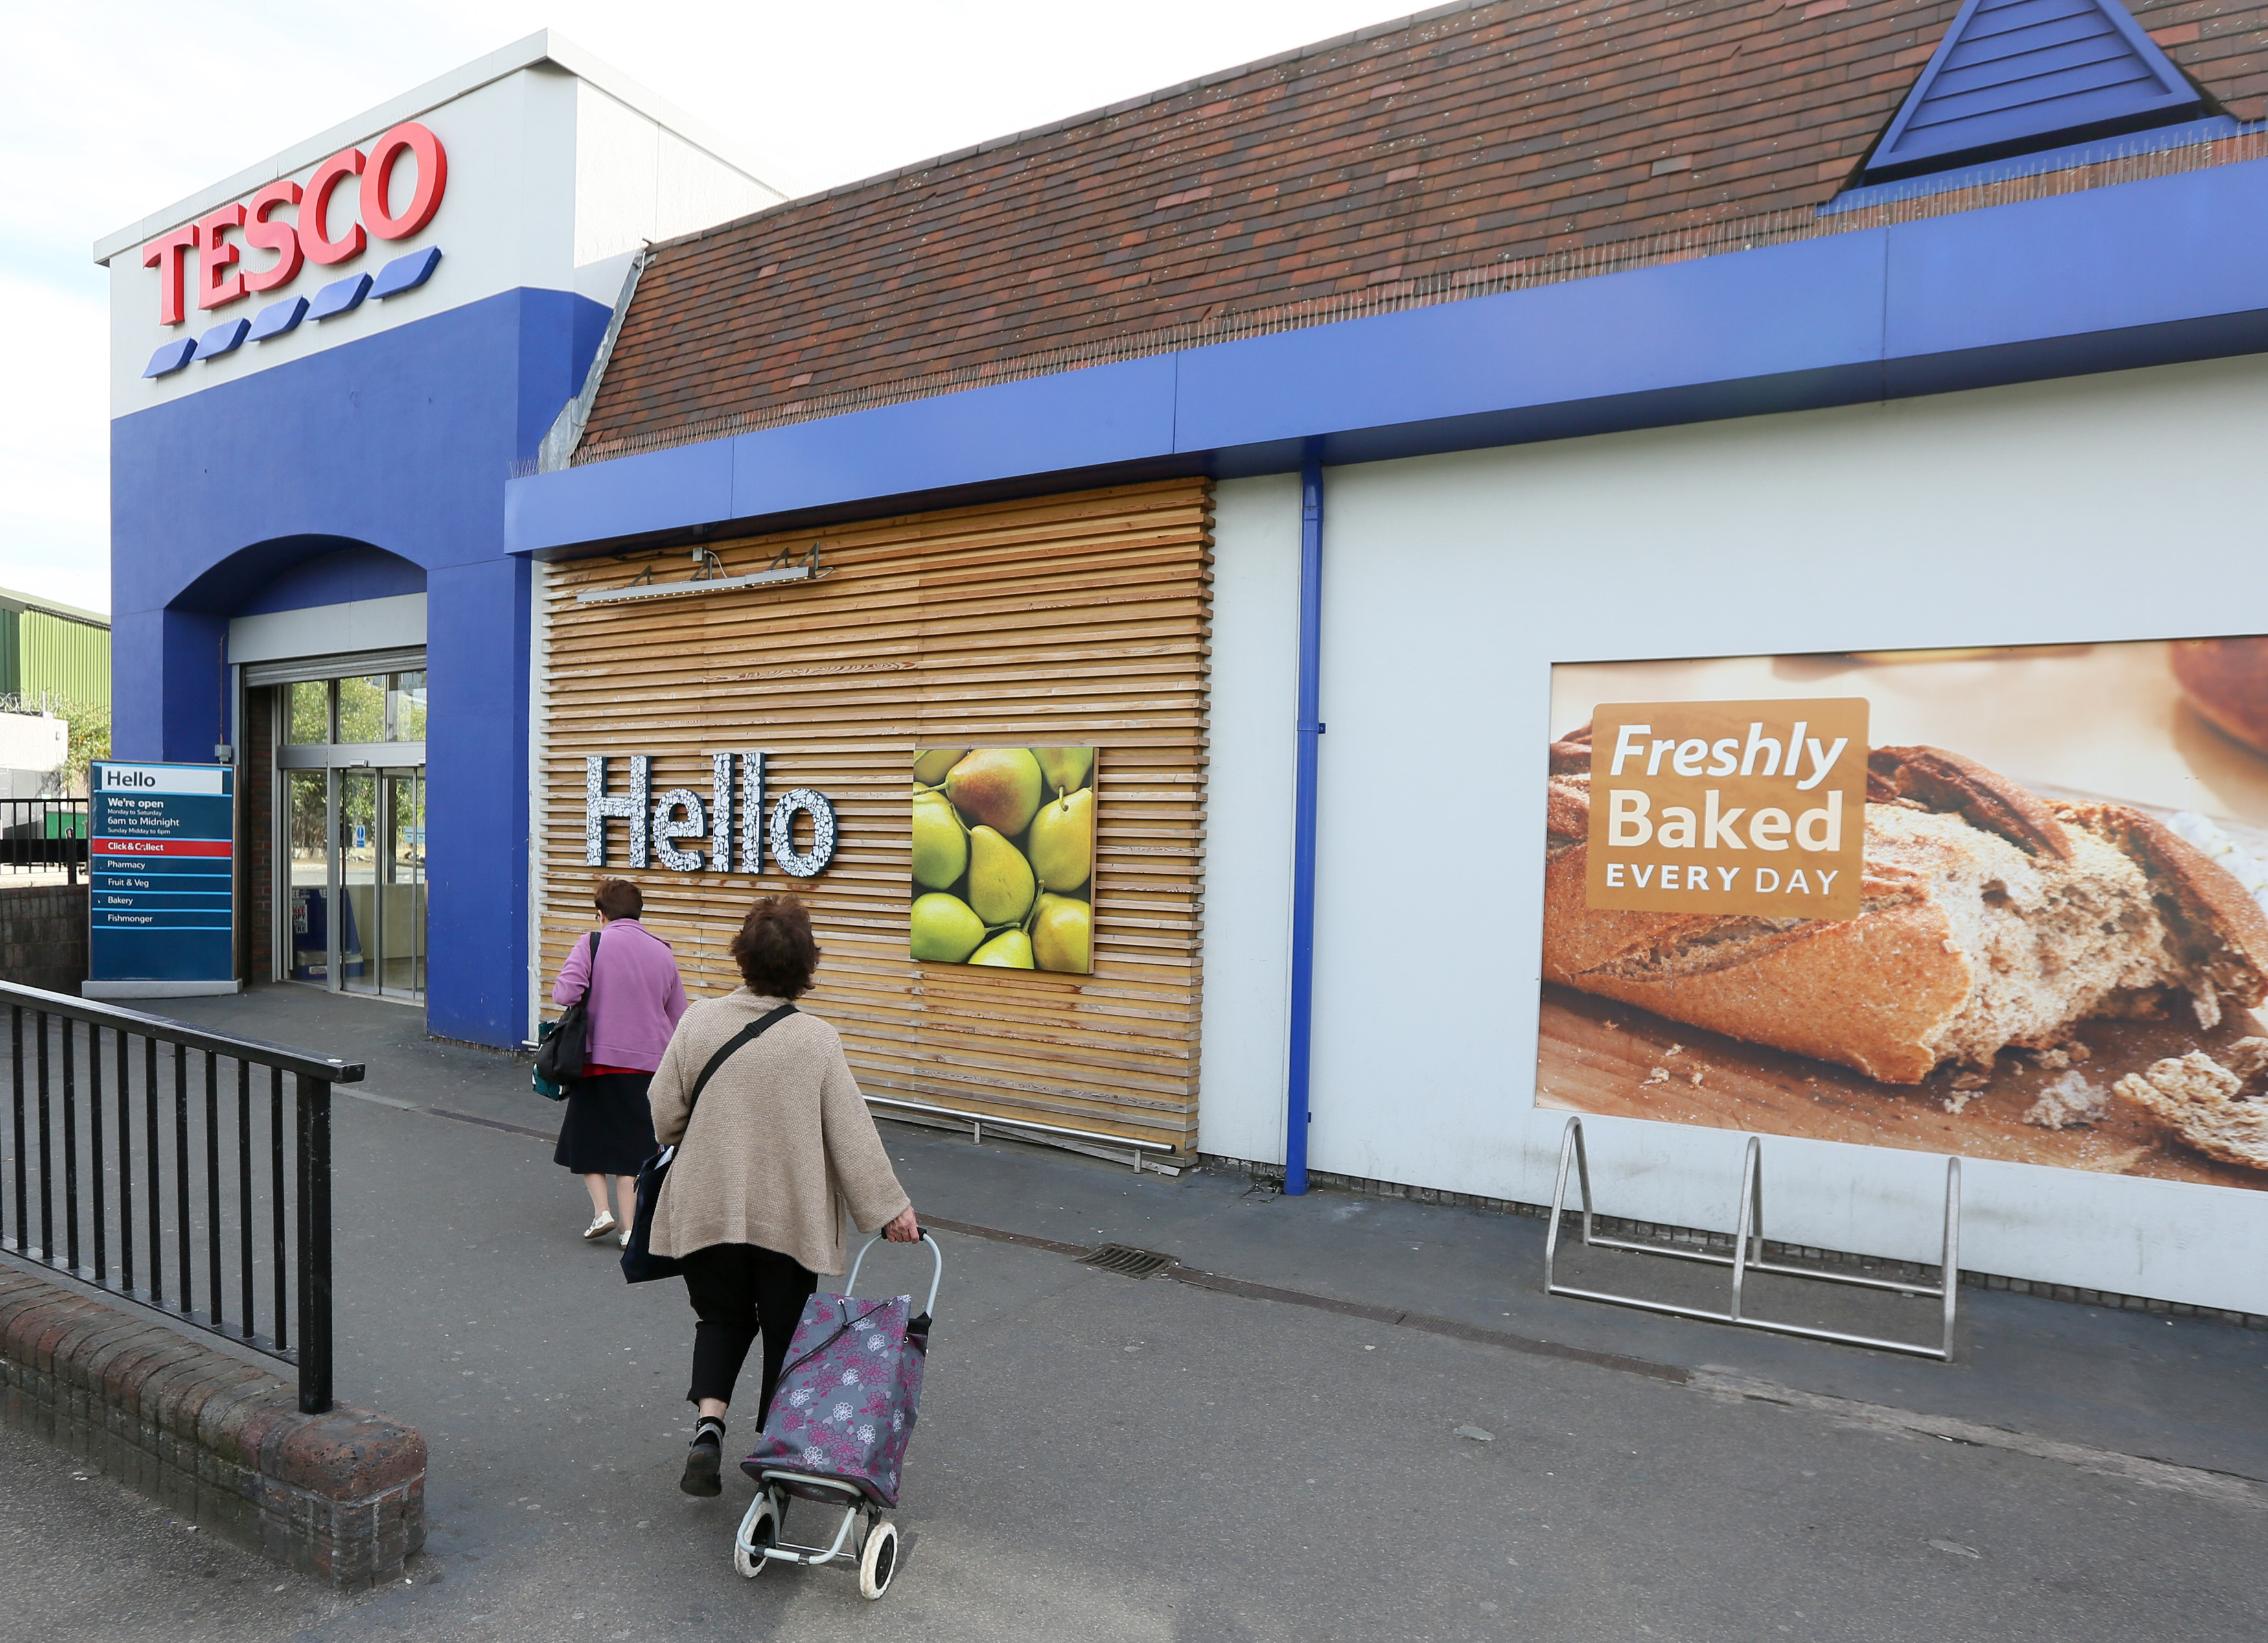 As Britons target cheaper food, Tesco cuts branded products in convenience  stores